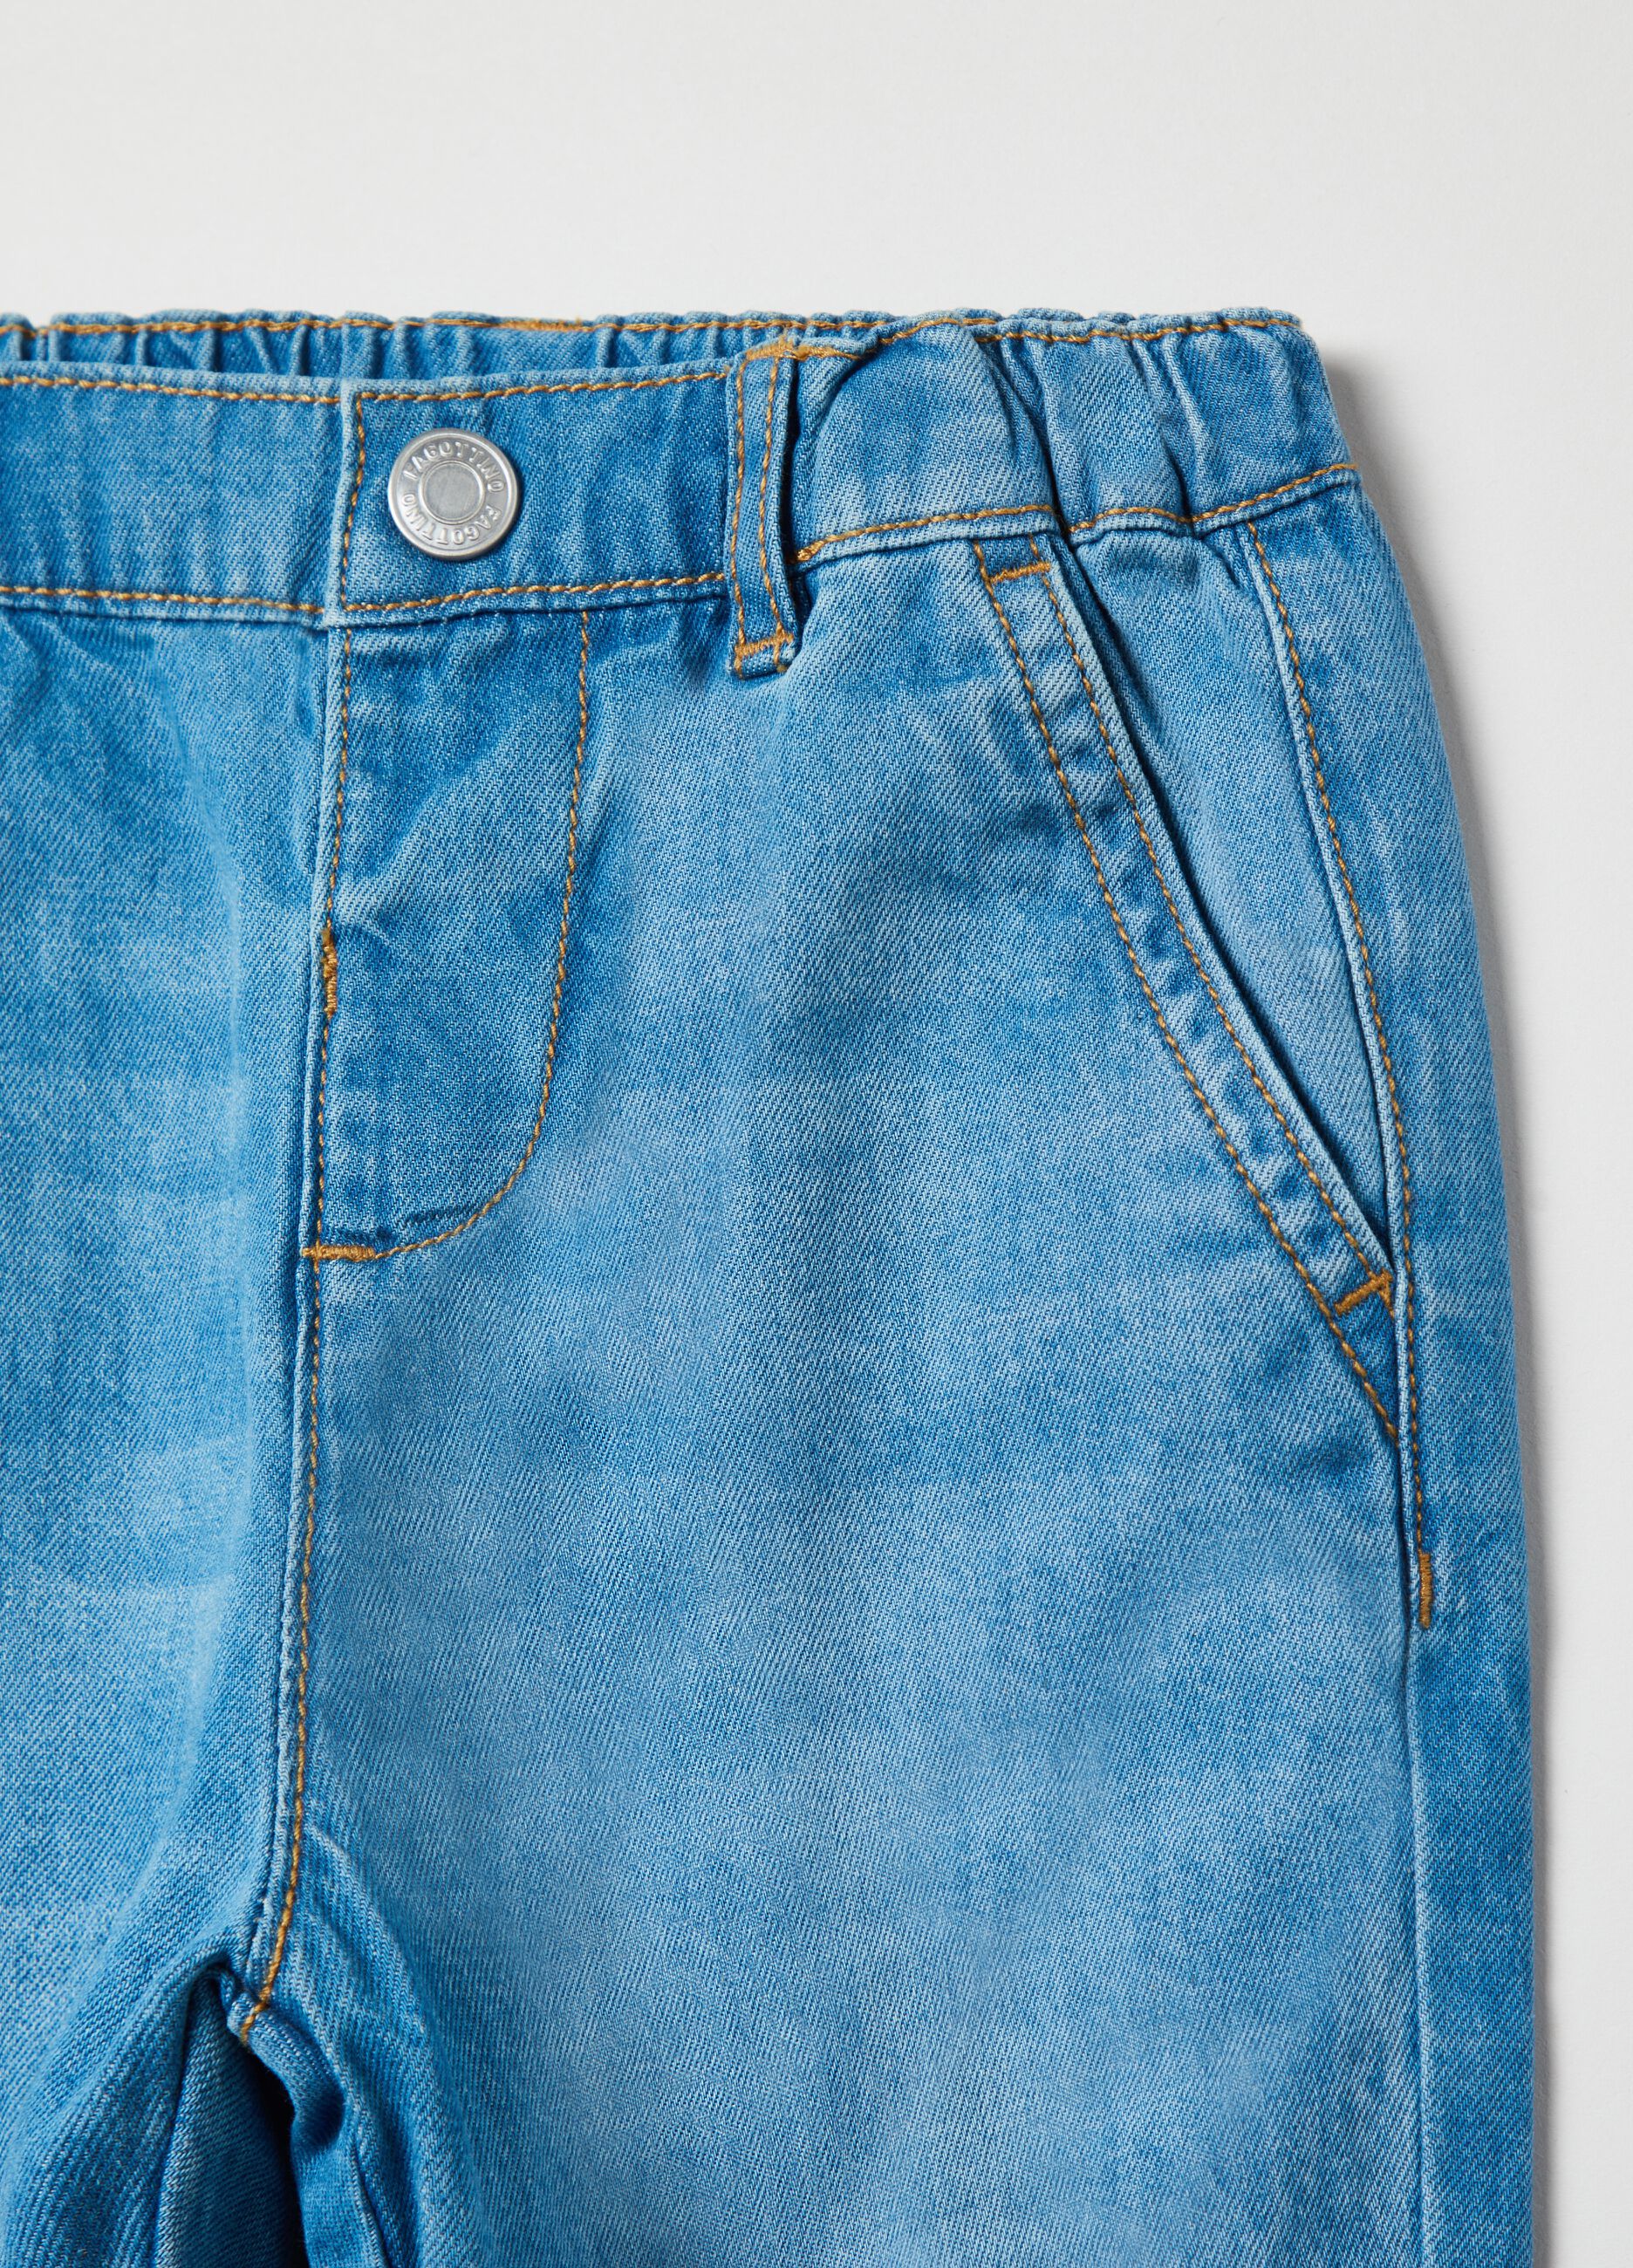 Cotton jeans with pockets